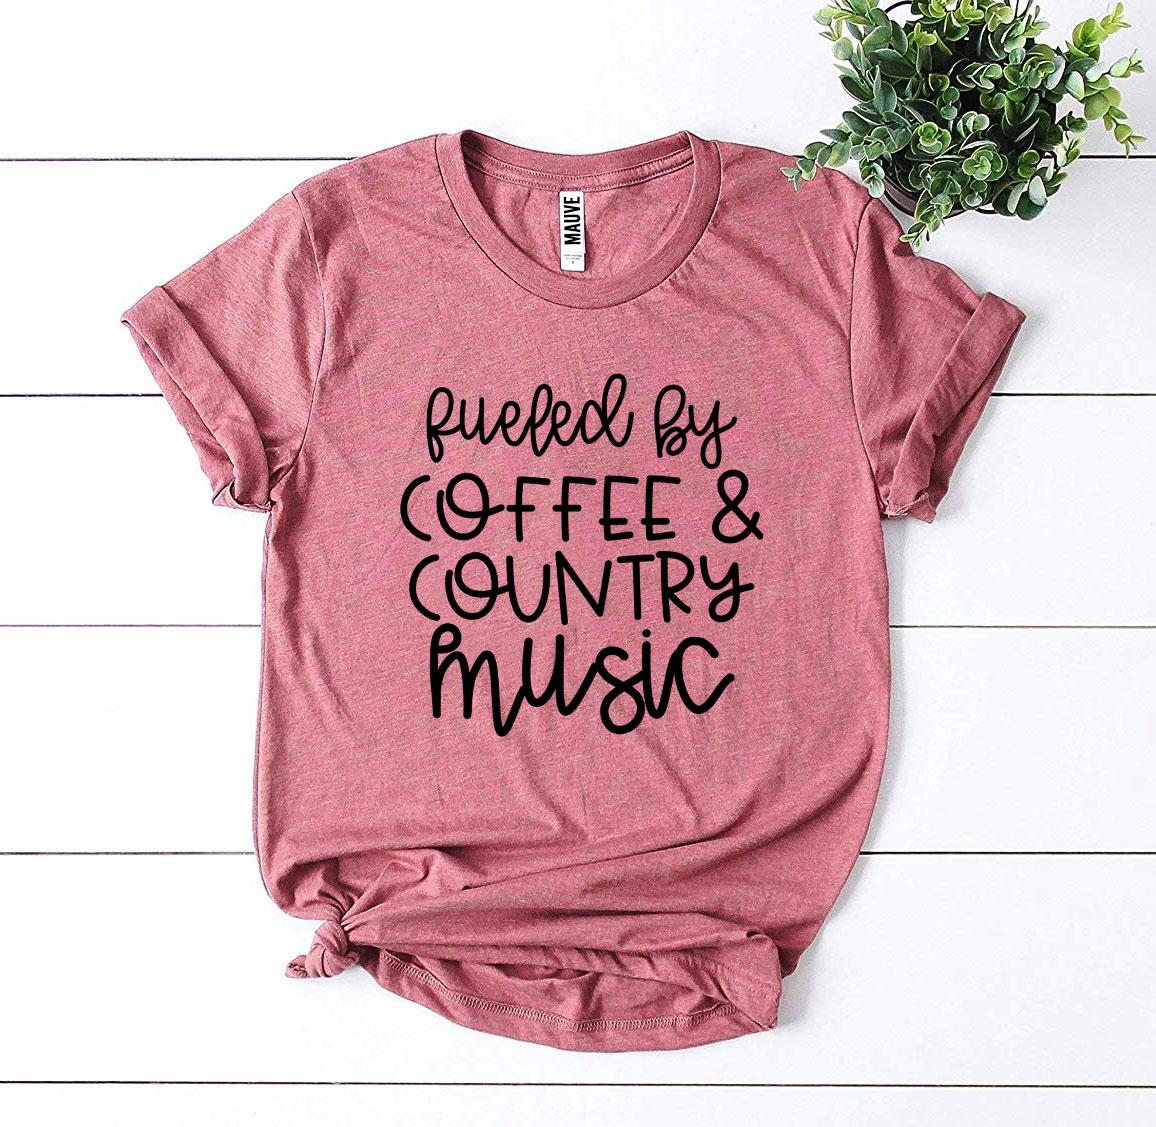 Fueled By Coffee And Country Music T-shirt